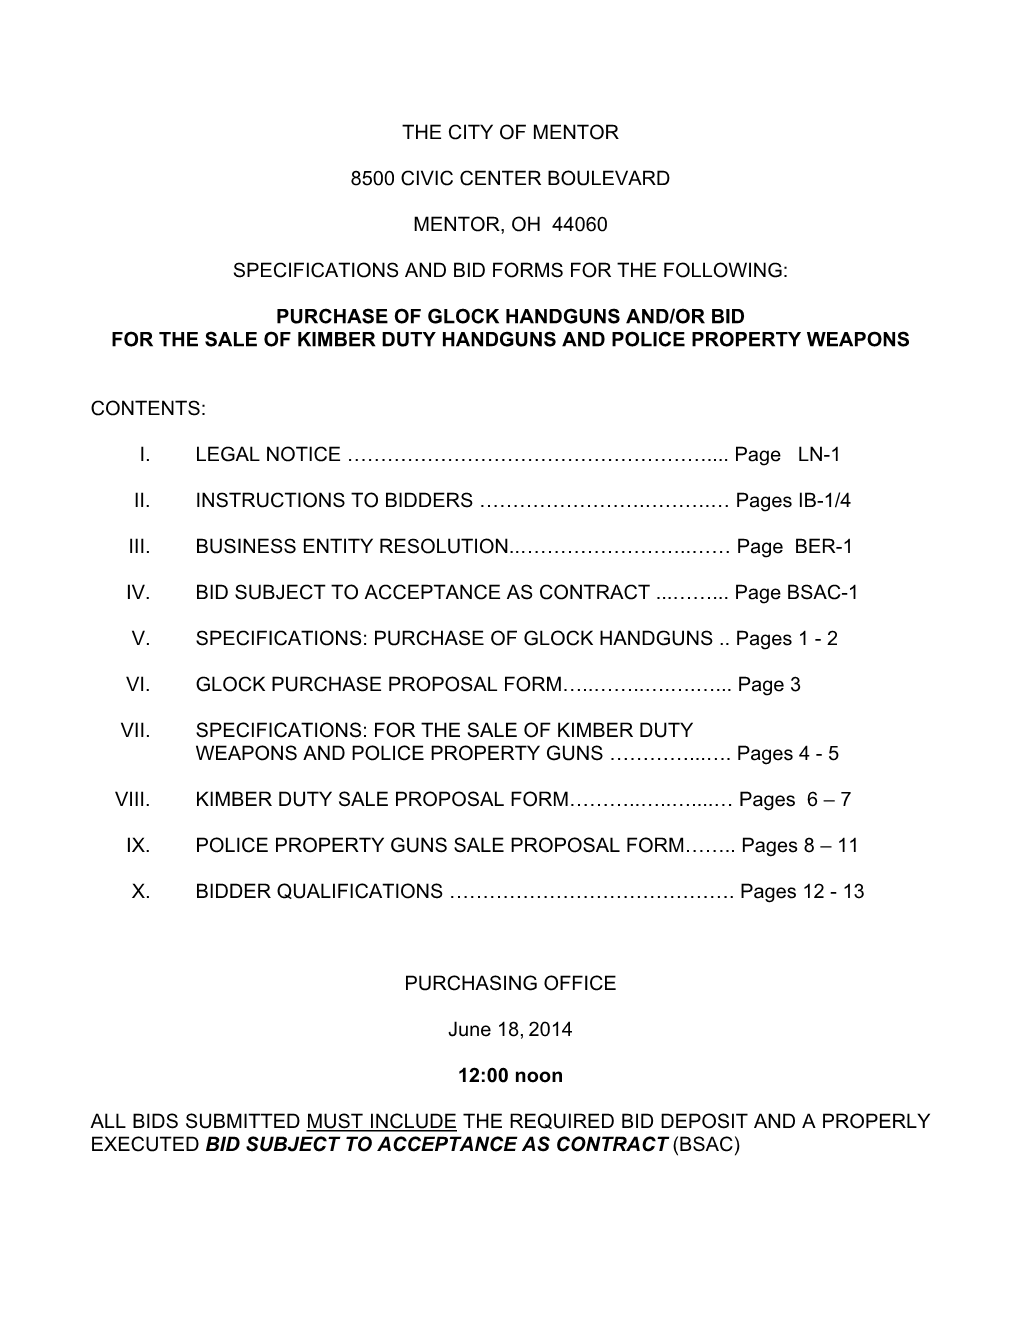 Bid Packet for Purchase and Sale of Police Handguns